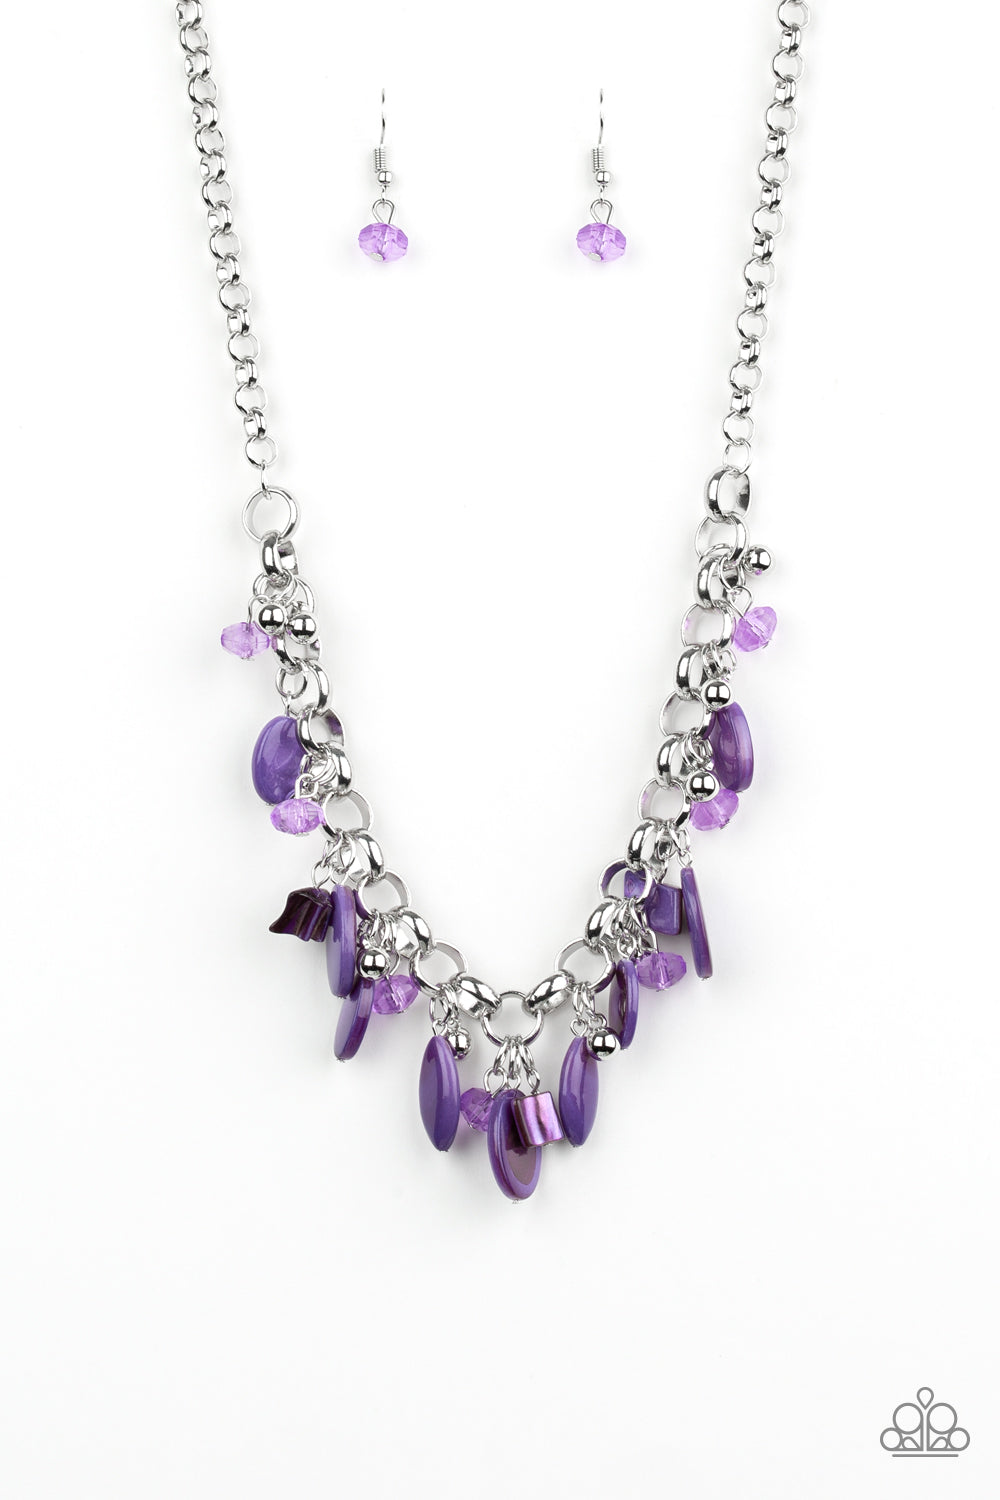 Paparazzi Necklaces - I Want To SEA the World - Purple